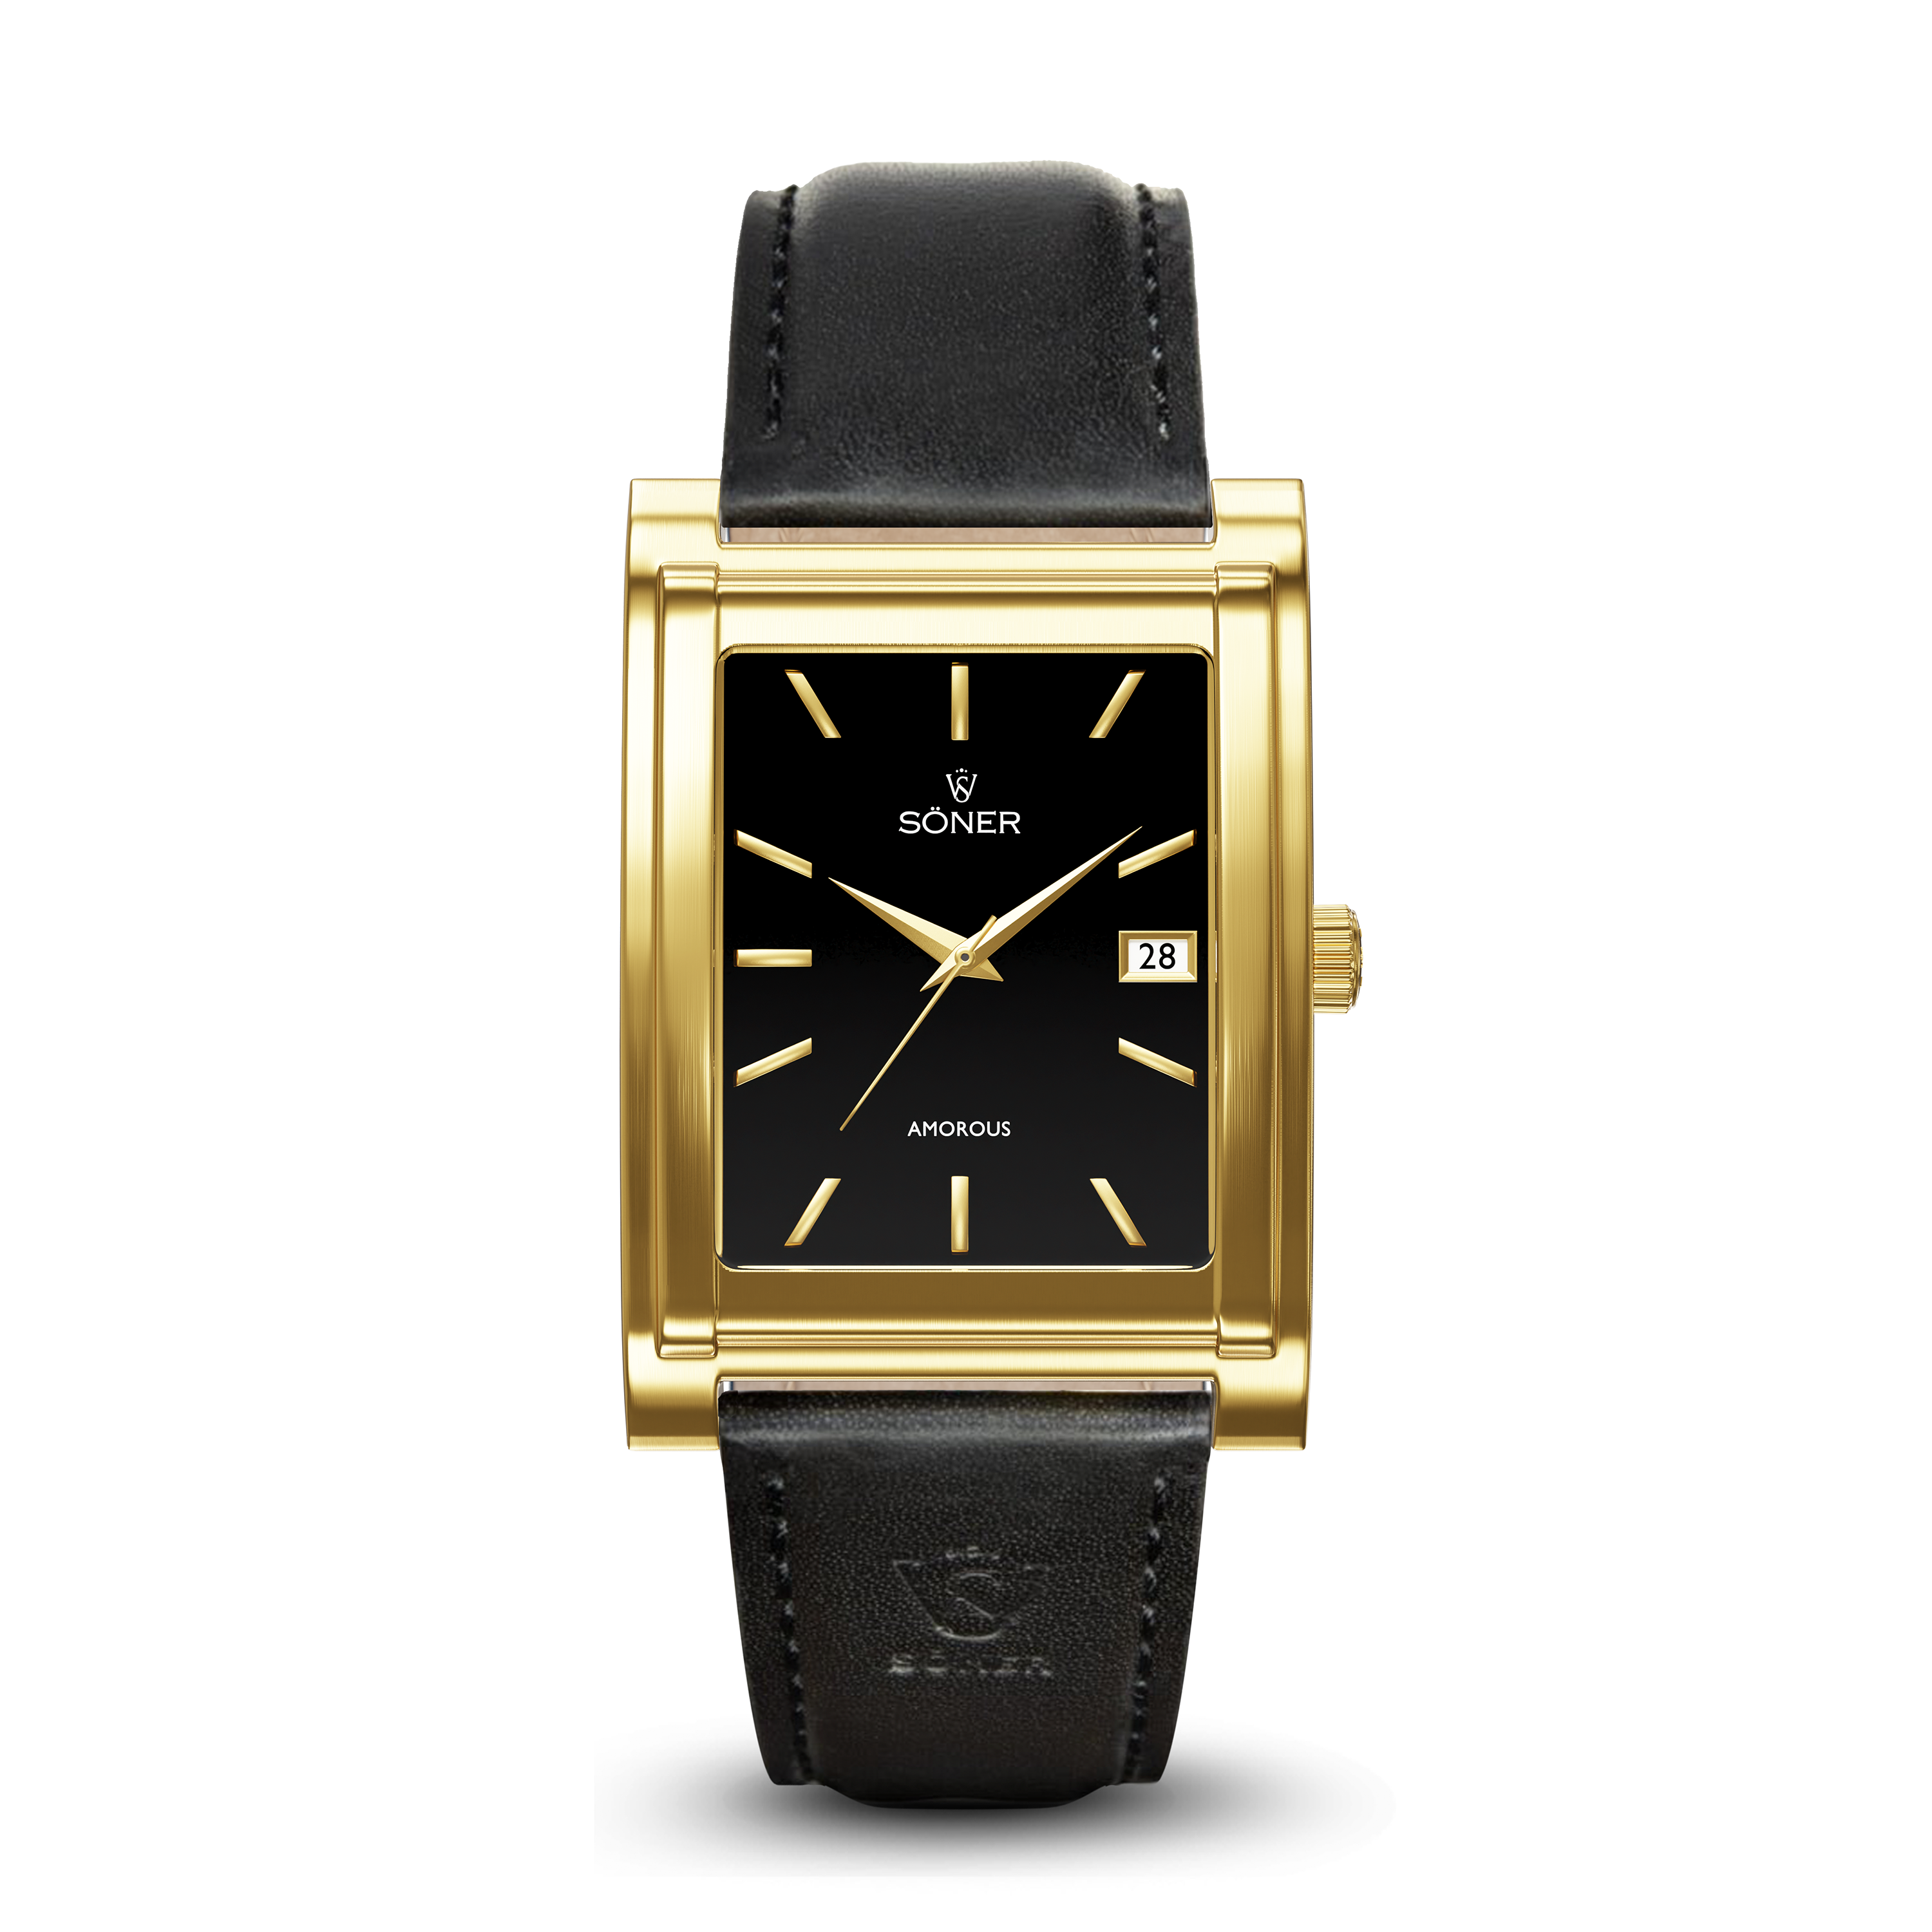 Square automatic watch, Amorous Milano with black dial - black leather strap front view